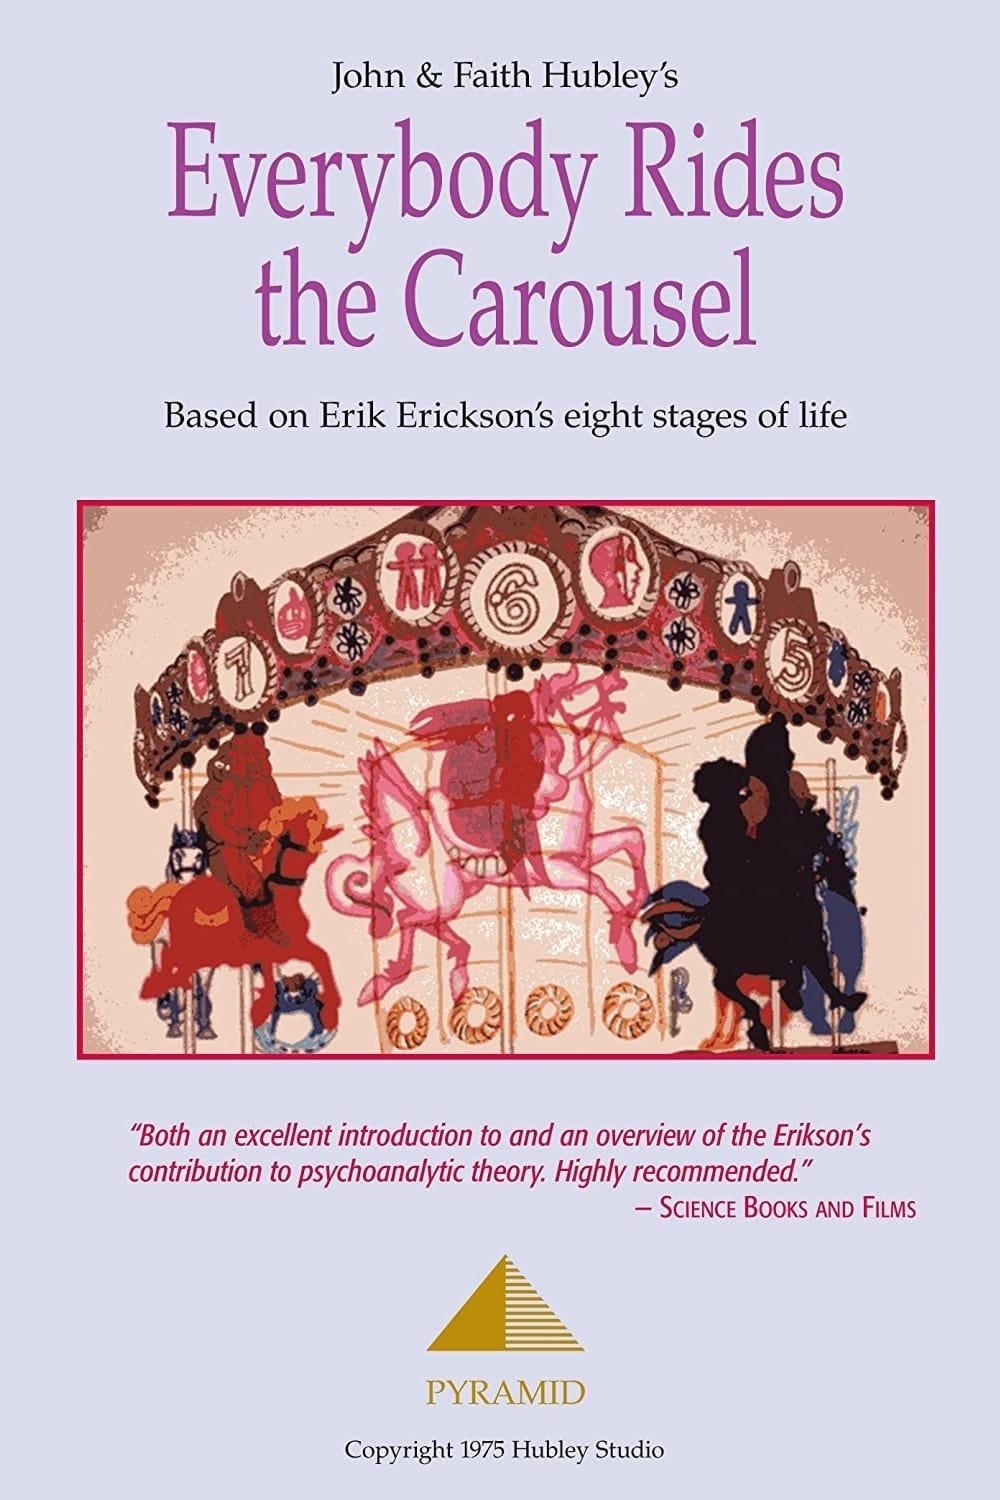 Poster of the movie Everybody Rides the Carousel